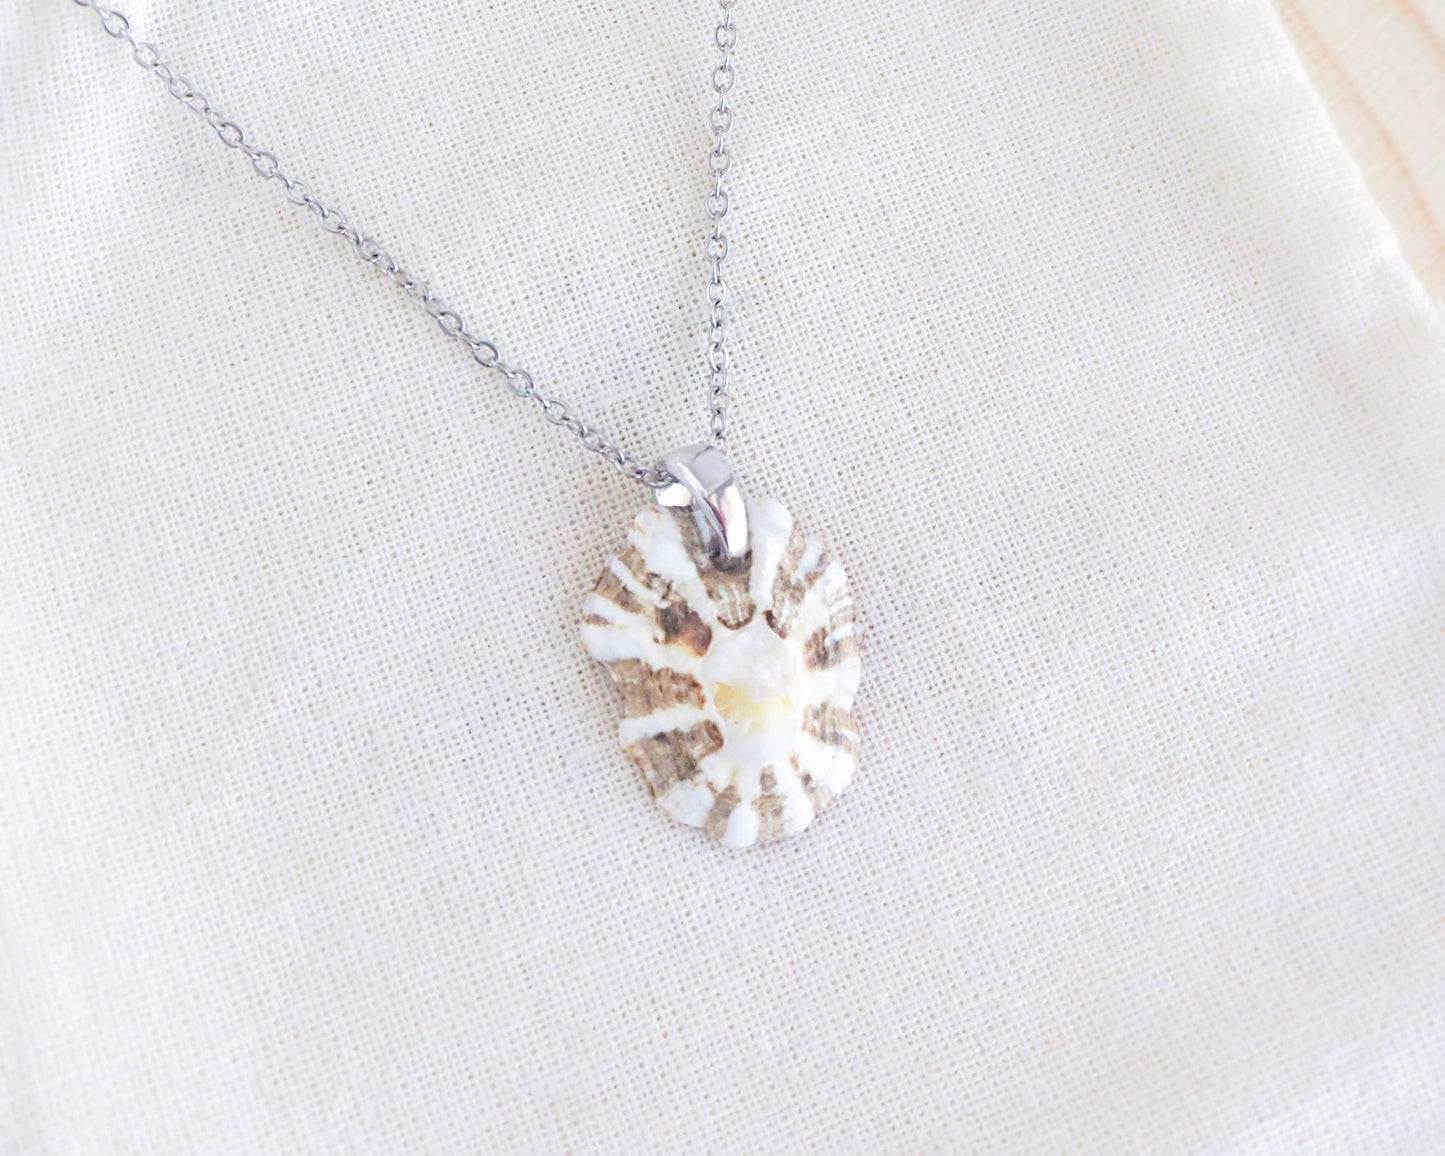 Tiny Limpet Shell from Portugal with Silver Necklace, Sea by Lou jewelry